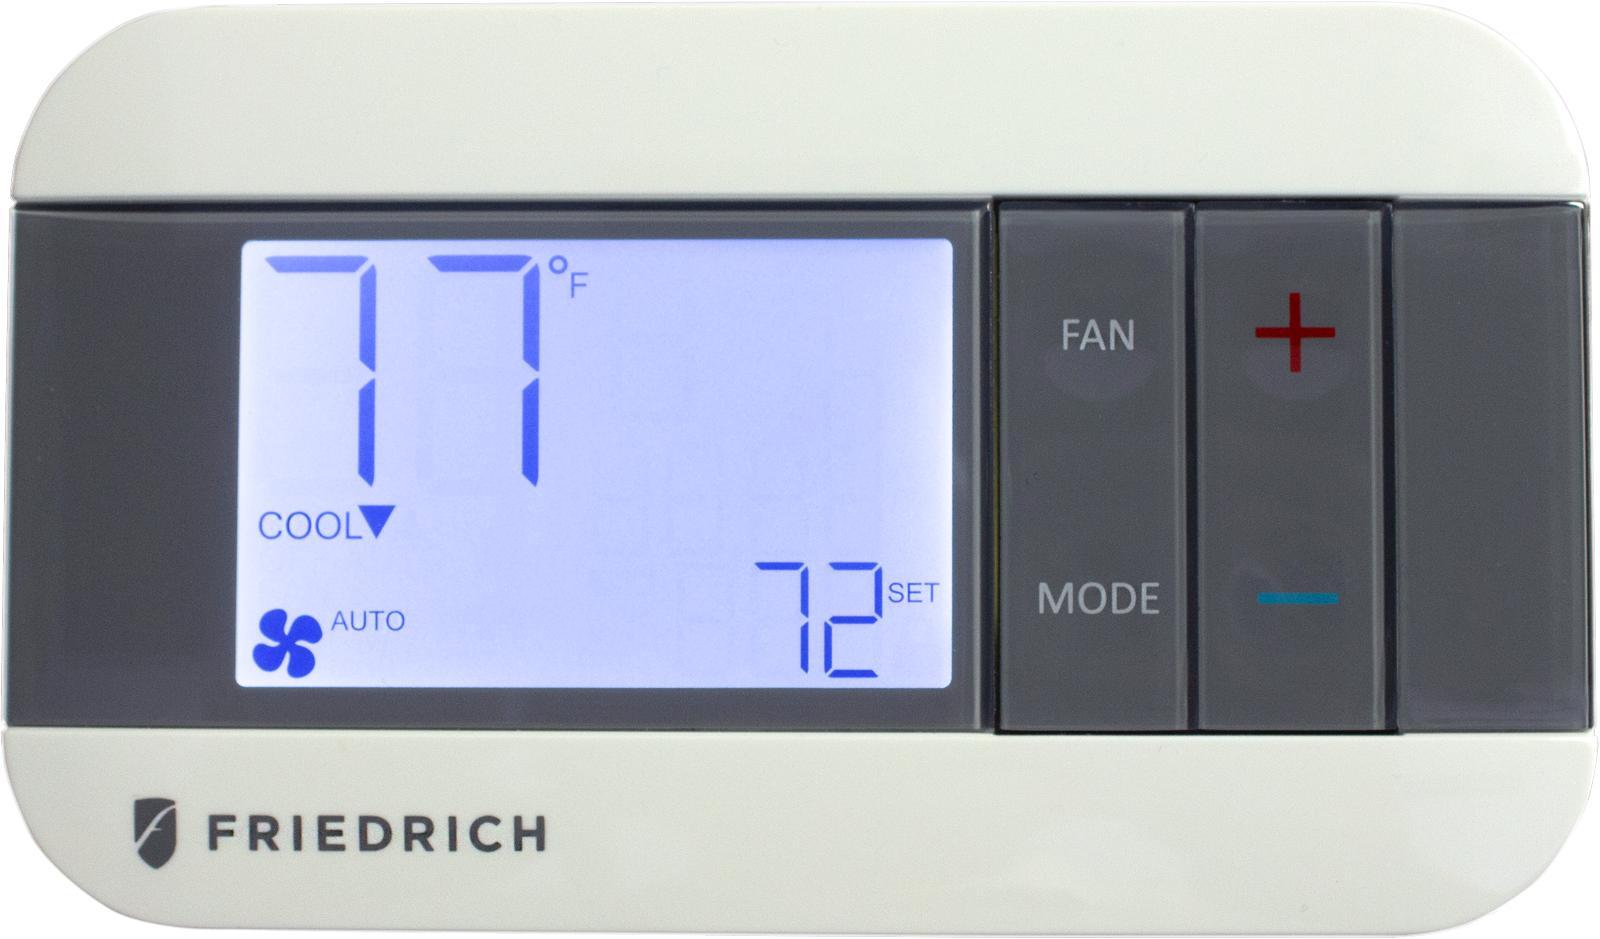 Friedrich THERMOSTAT 7 DAY PROGRAMMABLE